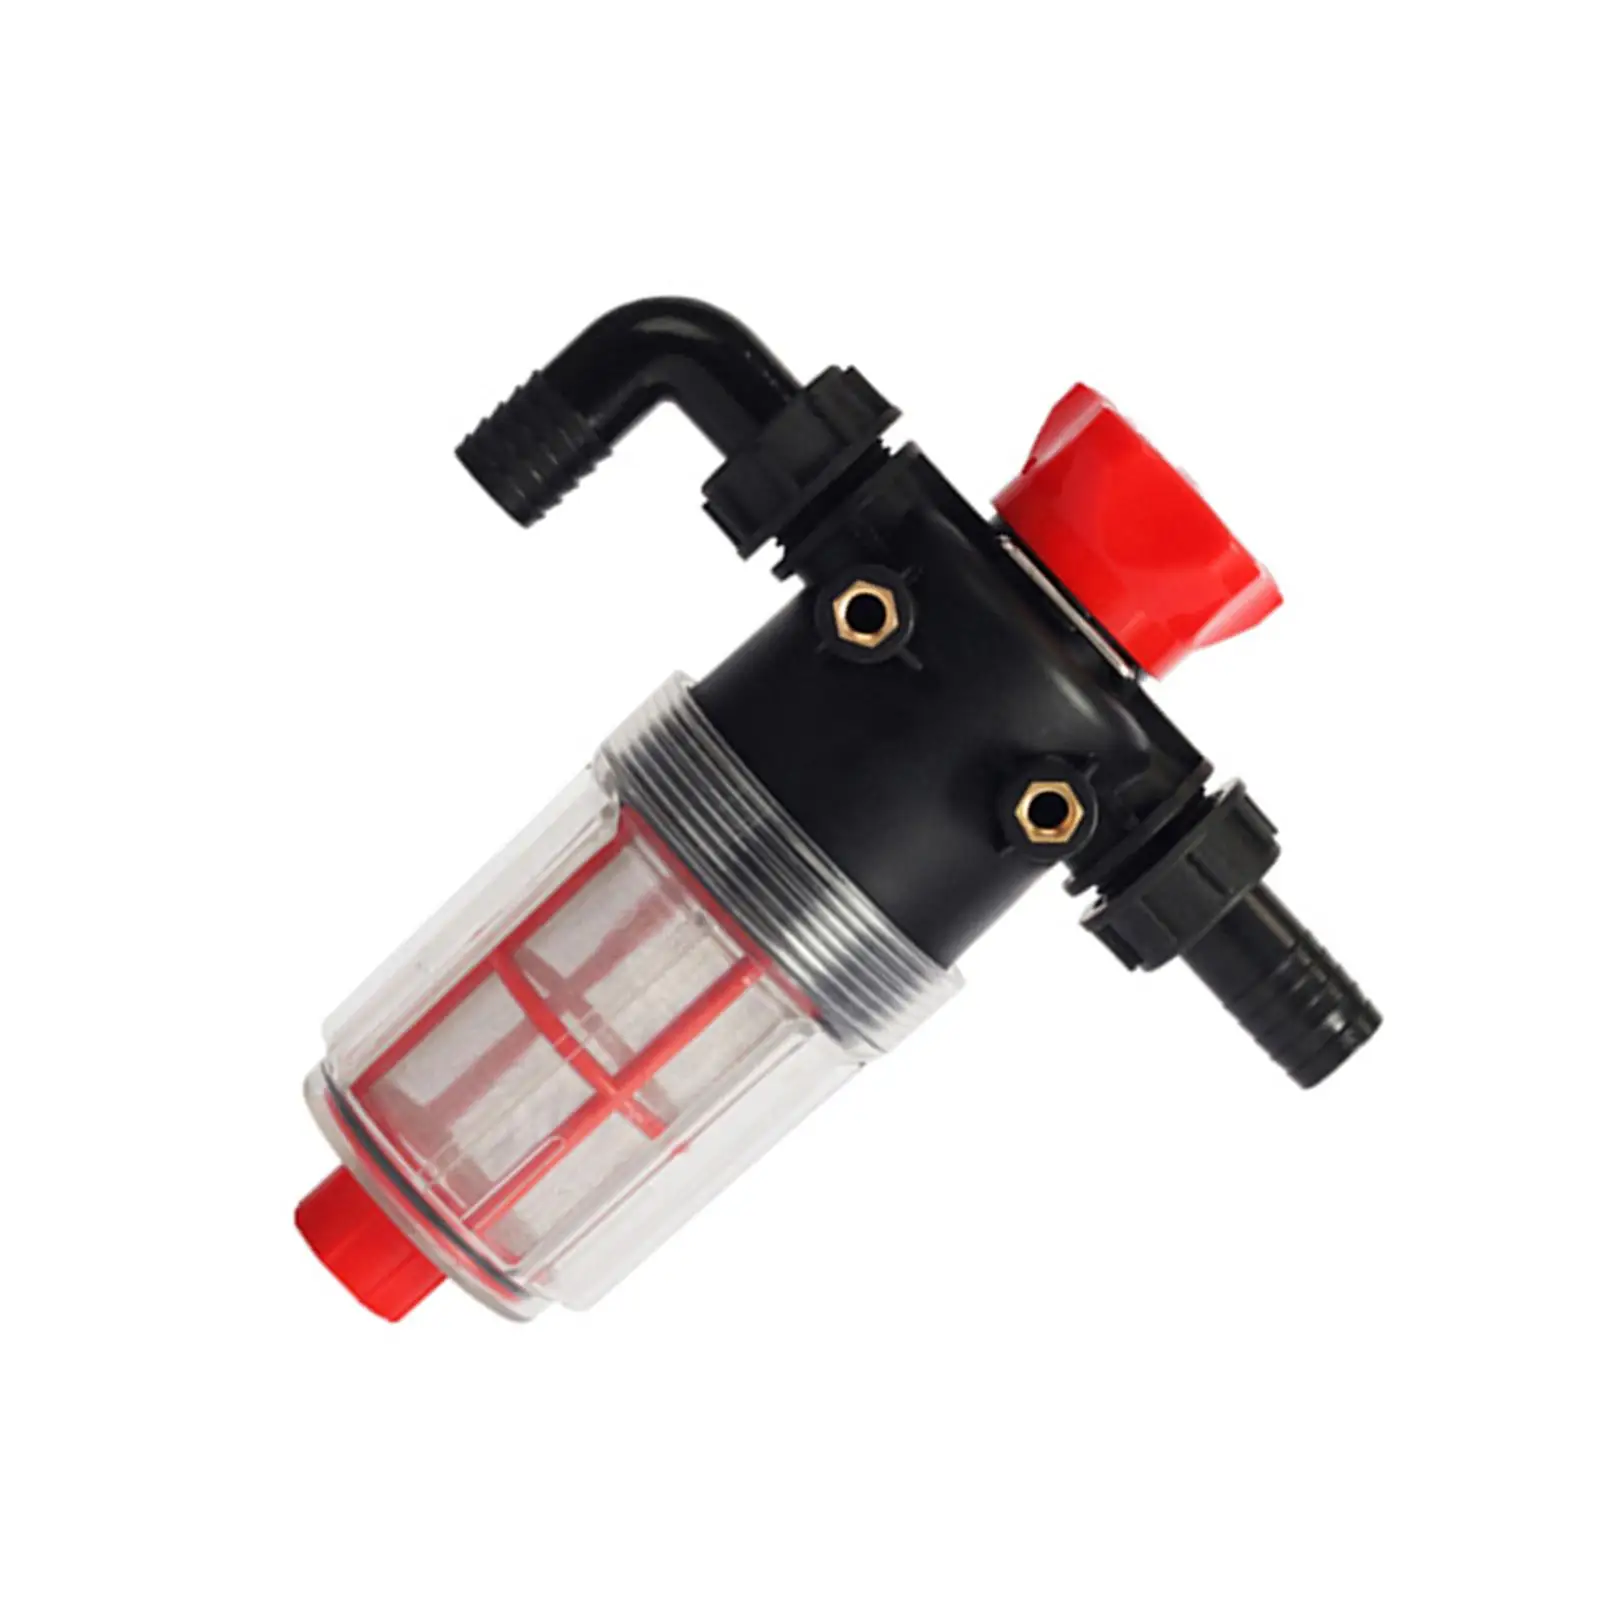 Water Strainer Filter Parts Piston Pump Protection Fitler for Plunger Pump